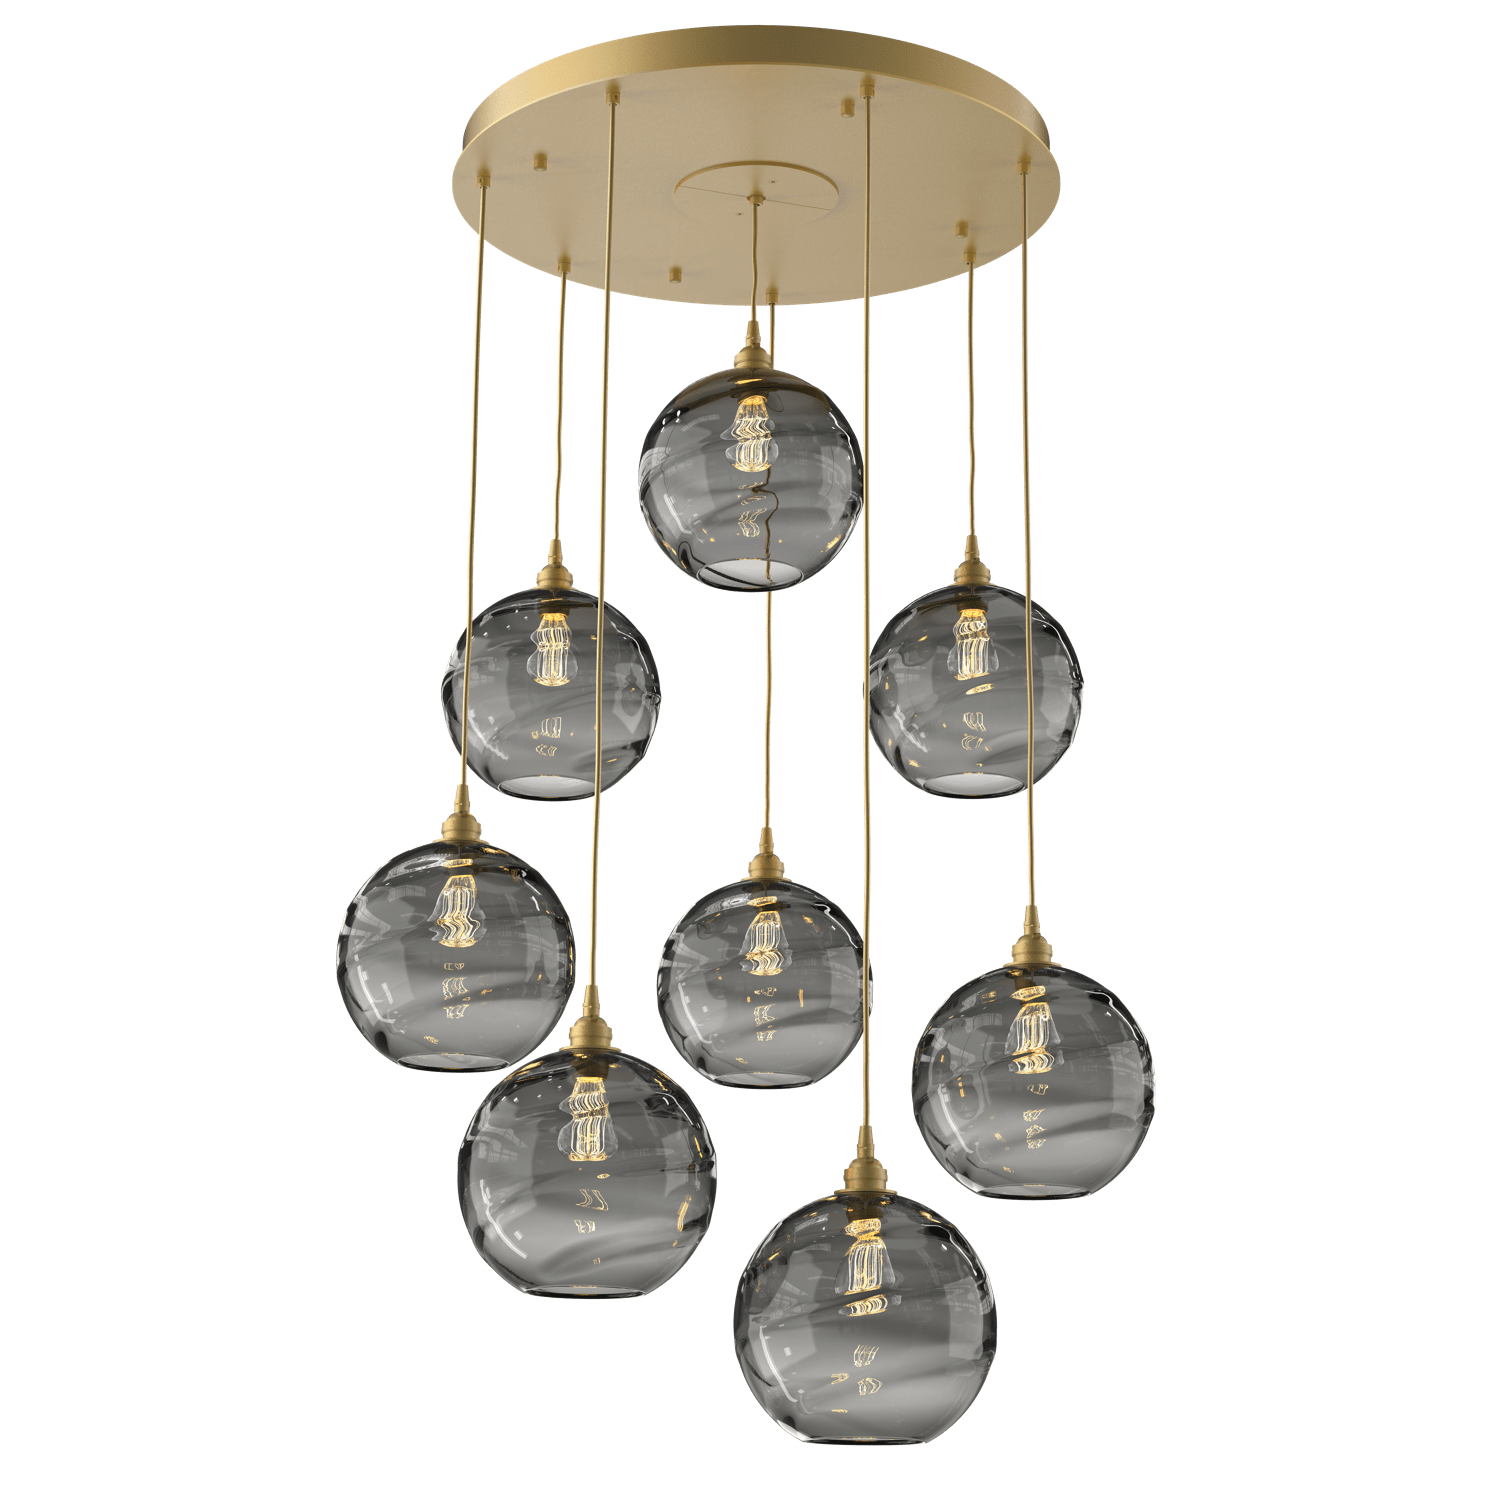 CHB0047-08-GB-OS-Hammerton-Studio-Optic-Blown-Glass-Terra-8-light-round-pendant-chandelier-with-gilded-brass-finish-and-optic-smoke-blown-glass-shades-and-incandescent-lamping